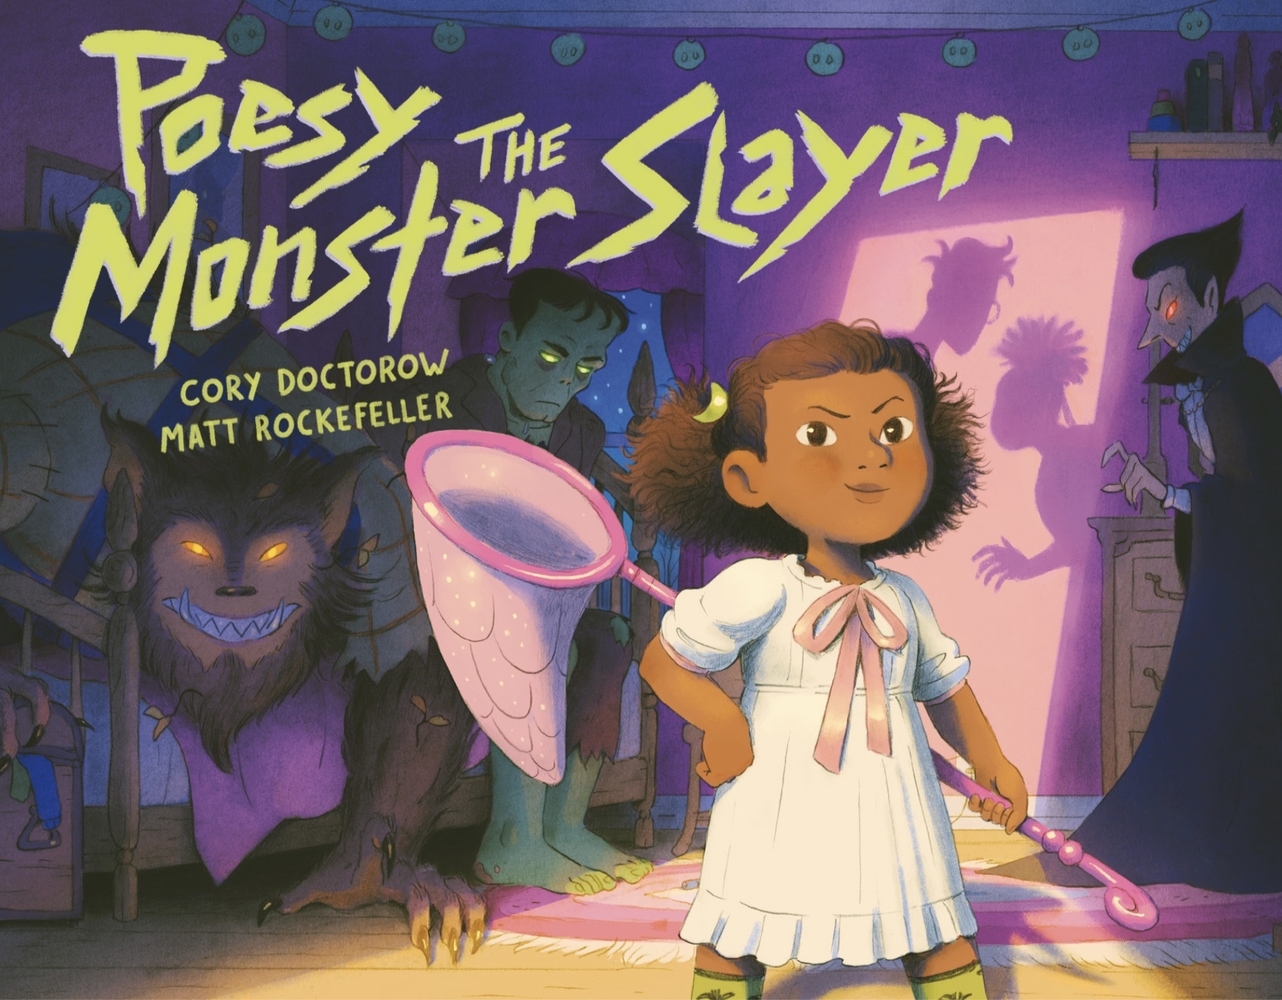 Book “Poesy the Monster Slayer” by Cory Doctorow — July 14, 2020